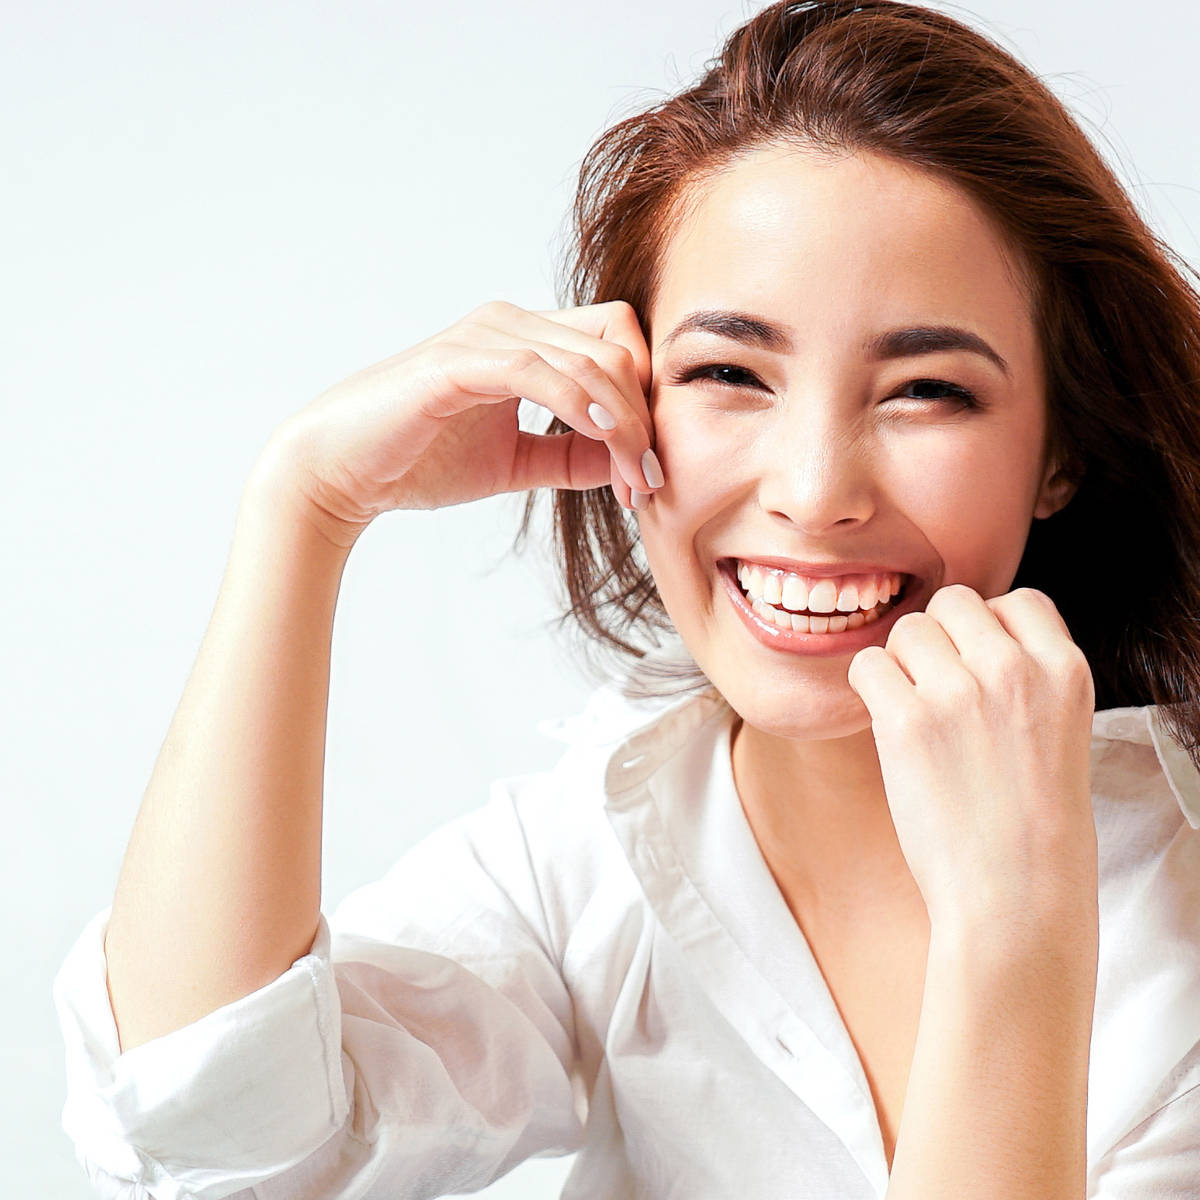 Beauty fashion portrait of smiling young woman